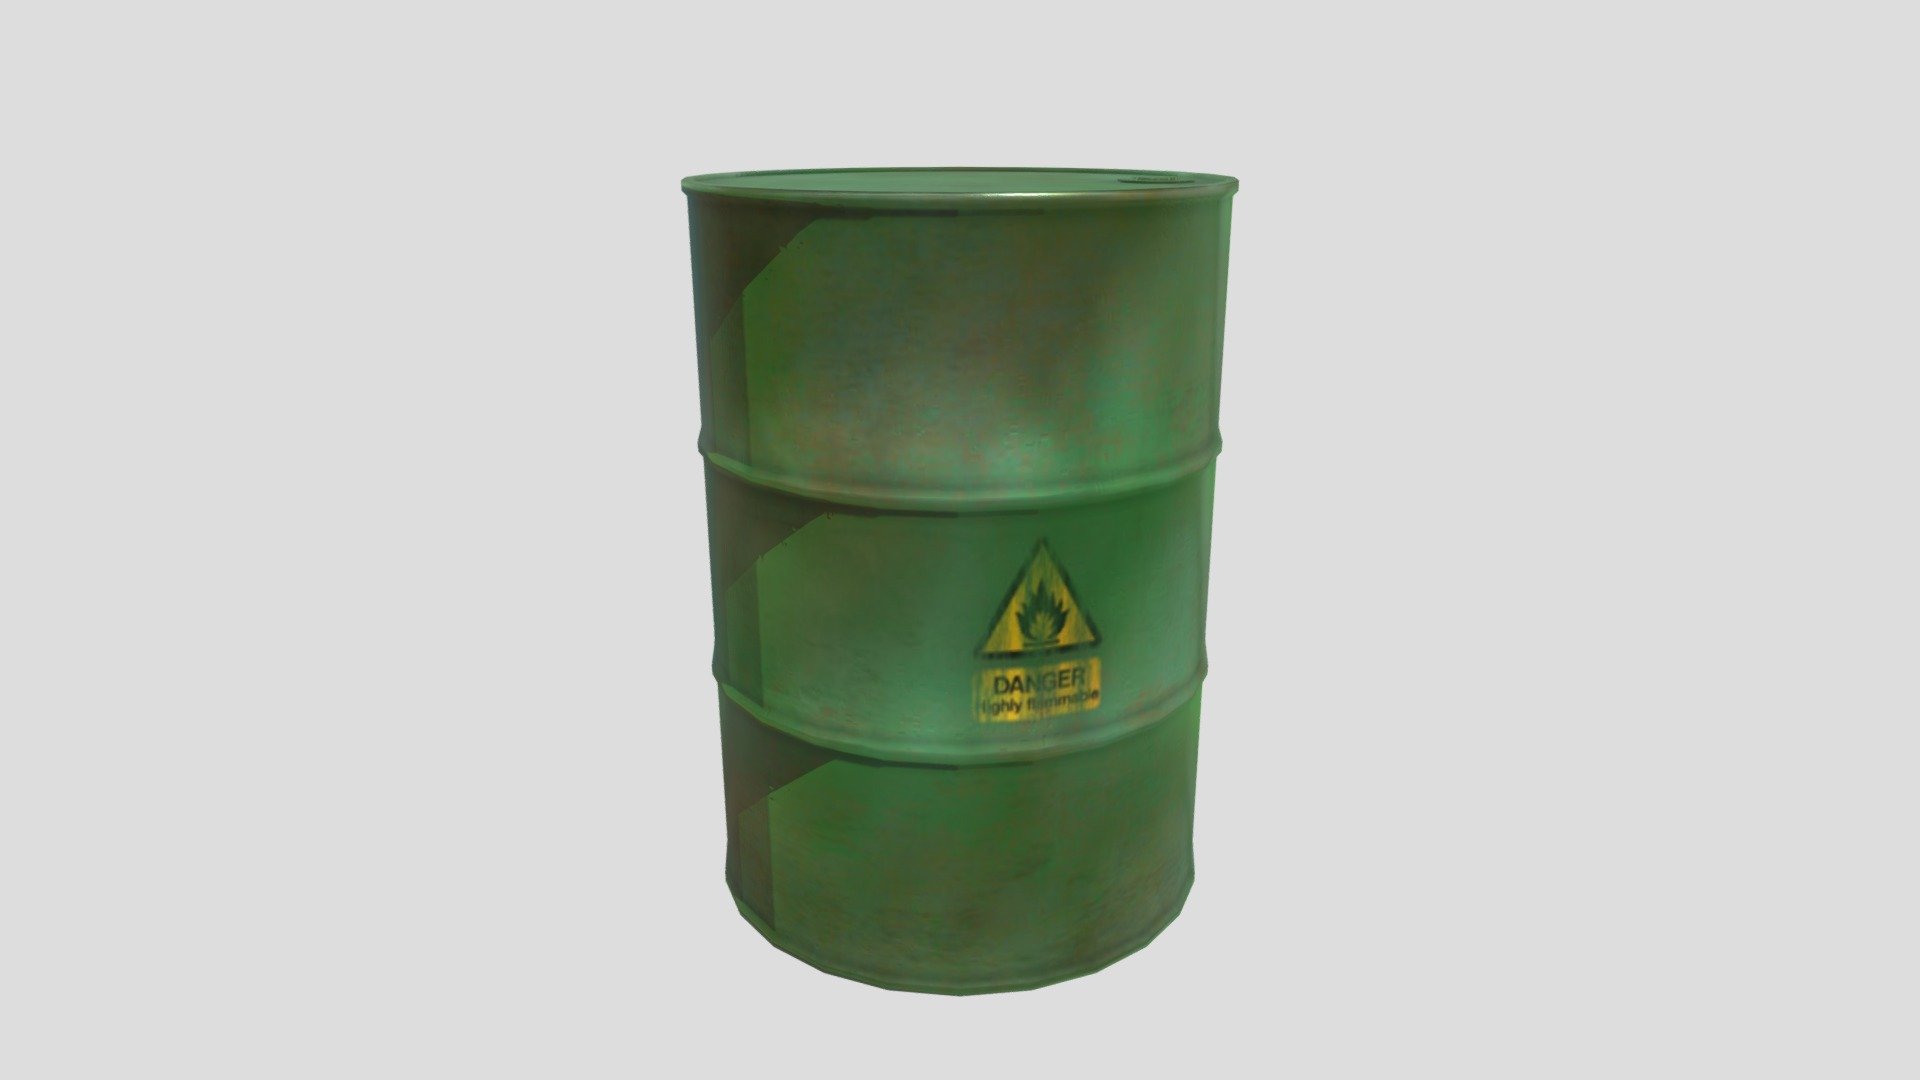 Oil_Barrel

Objects: 1
Verts  : 496
Edges  : 1036
Faces  : 542
Tris   : 988

Polygon Mesh : tris &amp; quads , subdivison ready
Texture      : 1K (4x diffuse maps{blue,green,red,grey},metallic,roughness,normal)
Source File  : Blender 3.1.2
Render       : Cycles - Oil Barrel - 3D model by EveryThing-Store 3d model